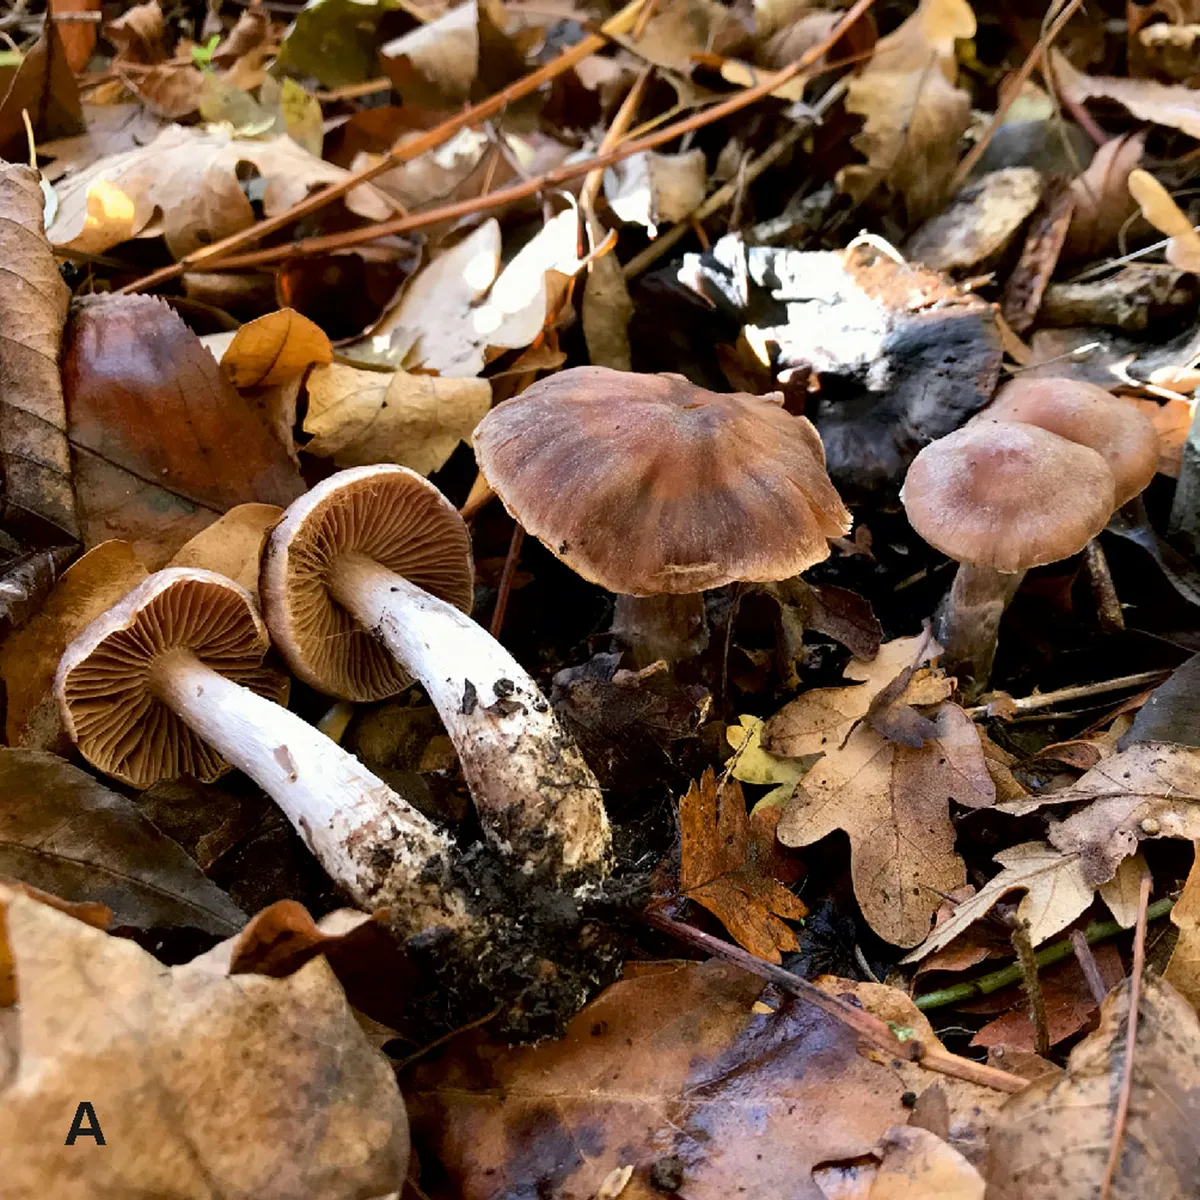 Cortinarius heatherae was one of six new species of toadstool mushroom discover in the UK. Mycologist Andy overall came across it near Heathrow airport. © Andy Overall